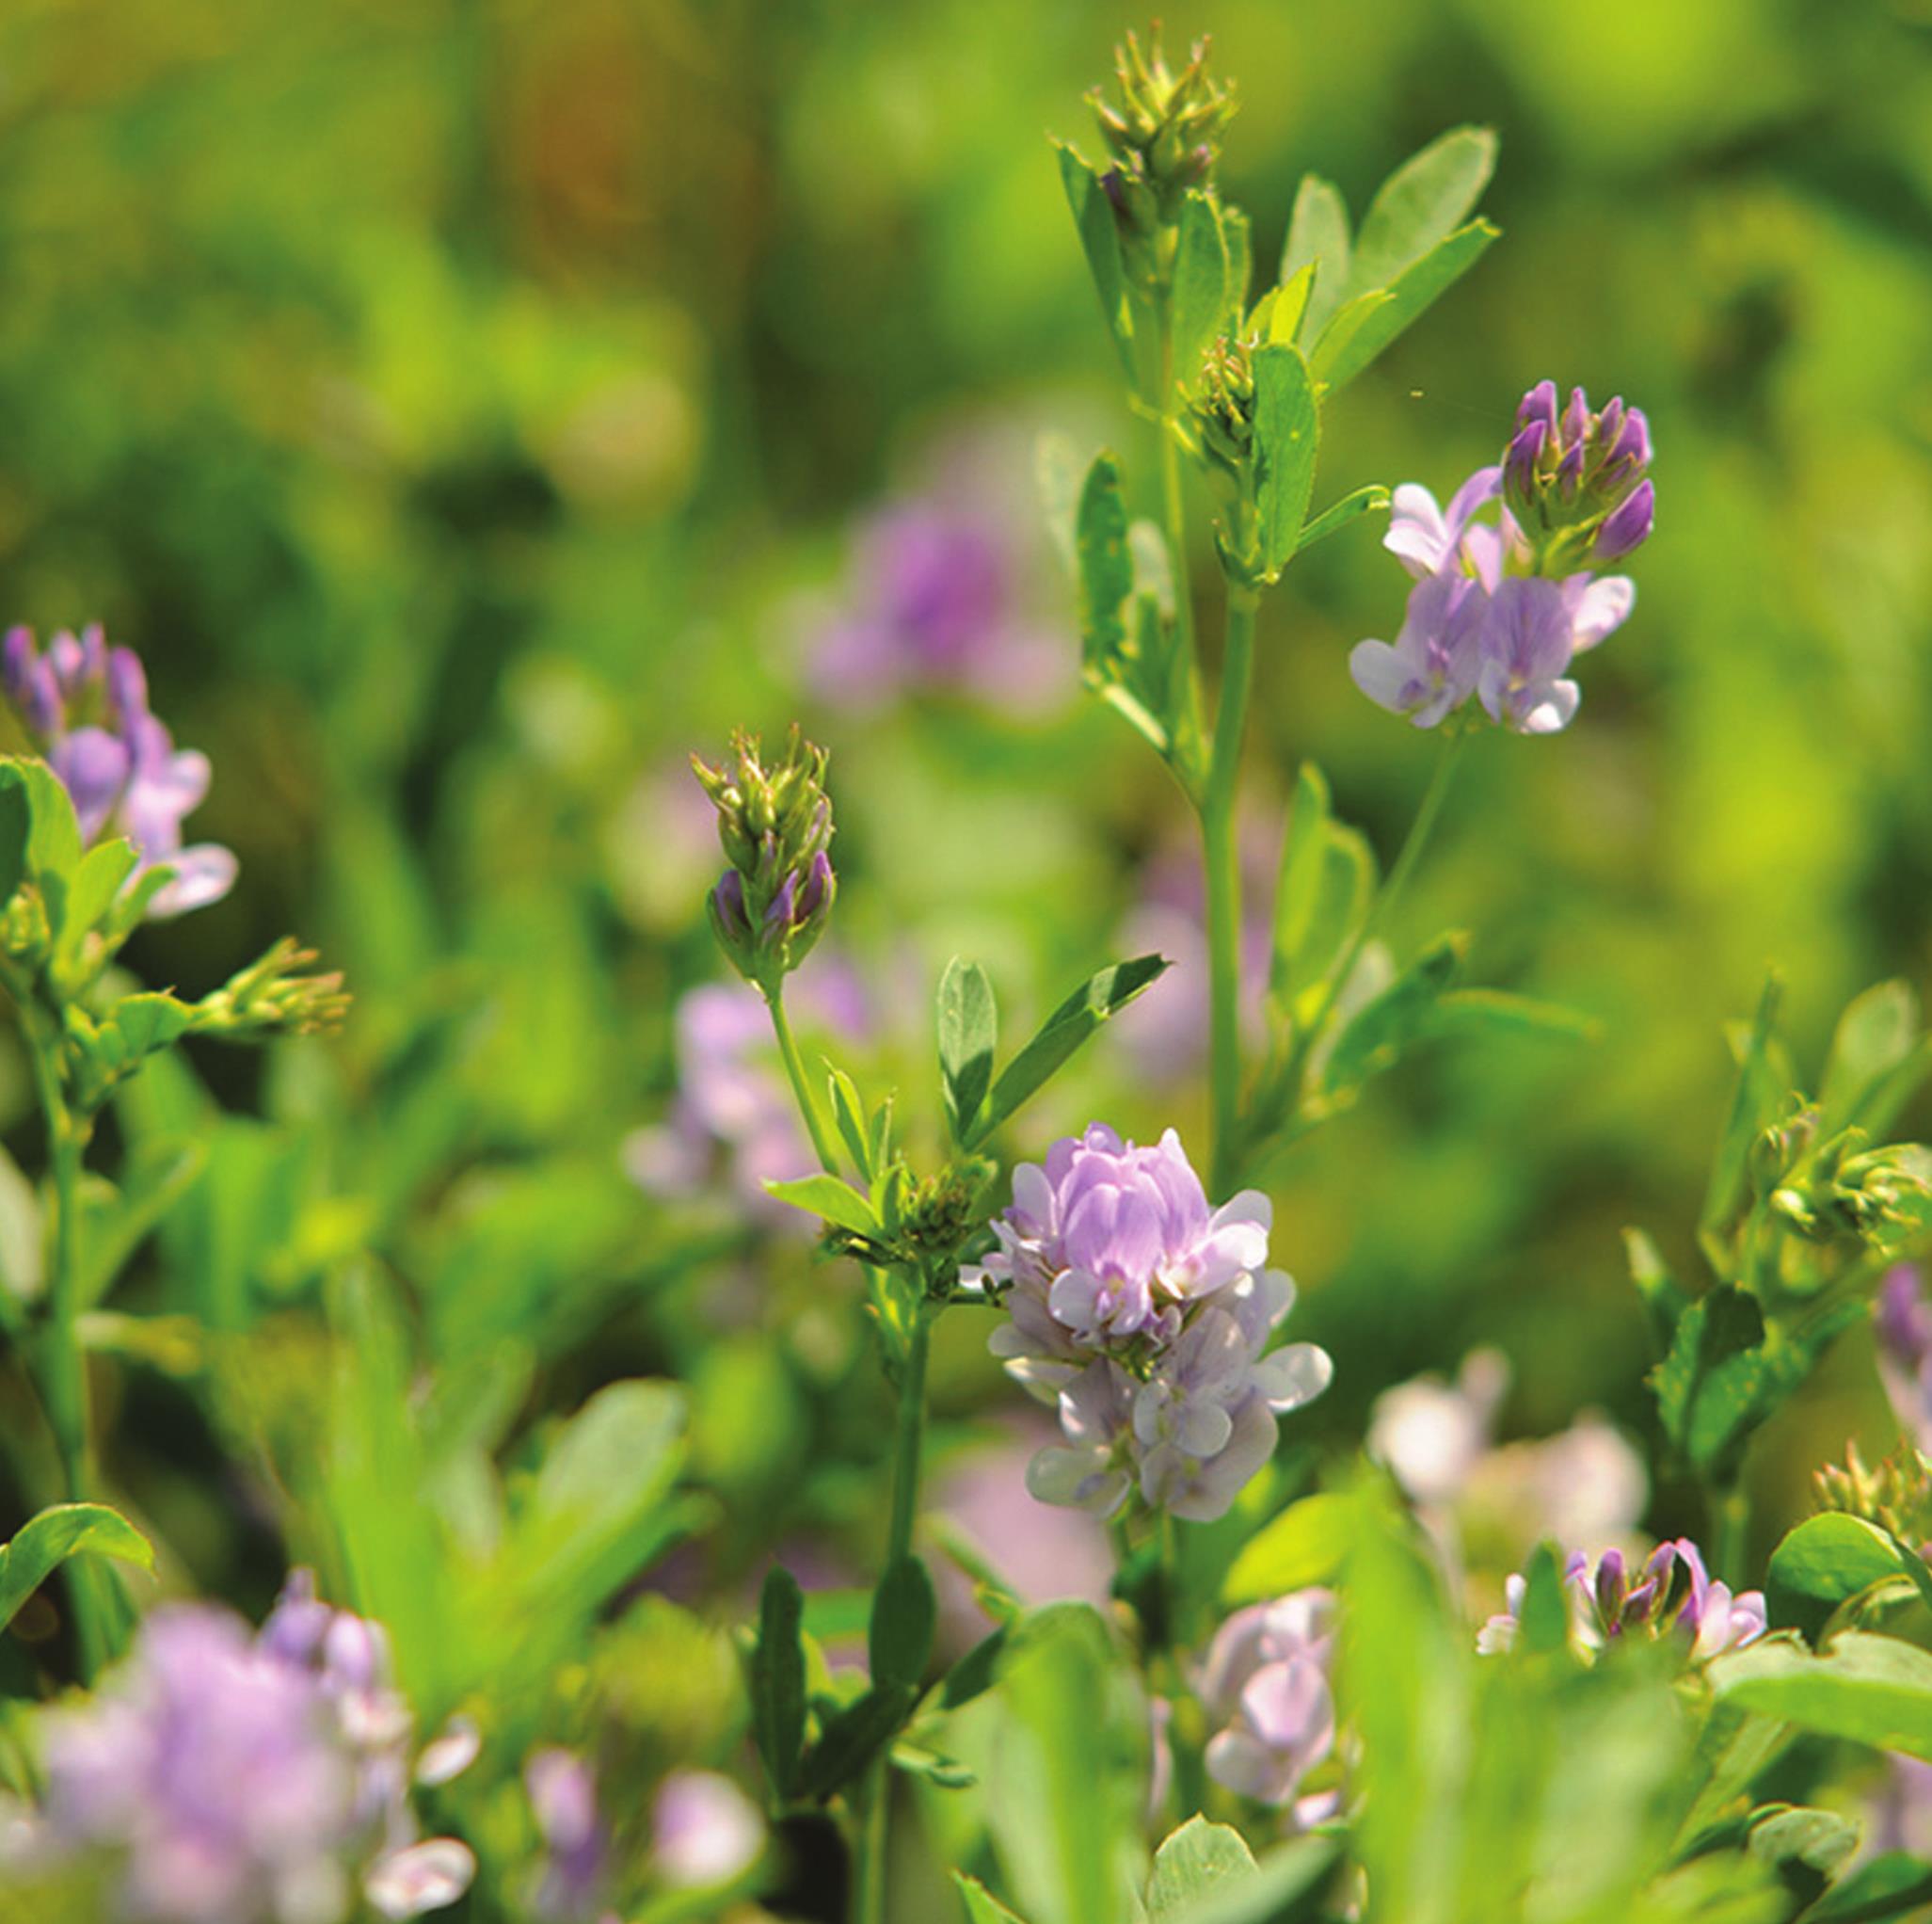 The popular Ranchers Thursday Lunchtime series of free cattle industry webinars is extending into August and September with a spotlight on alfalfa. Provided